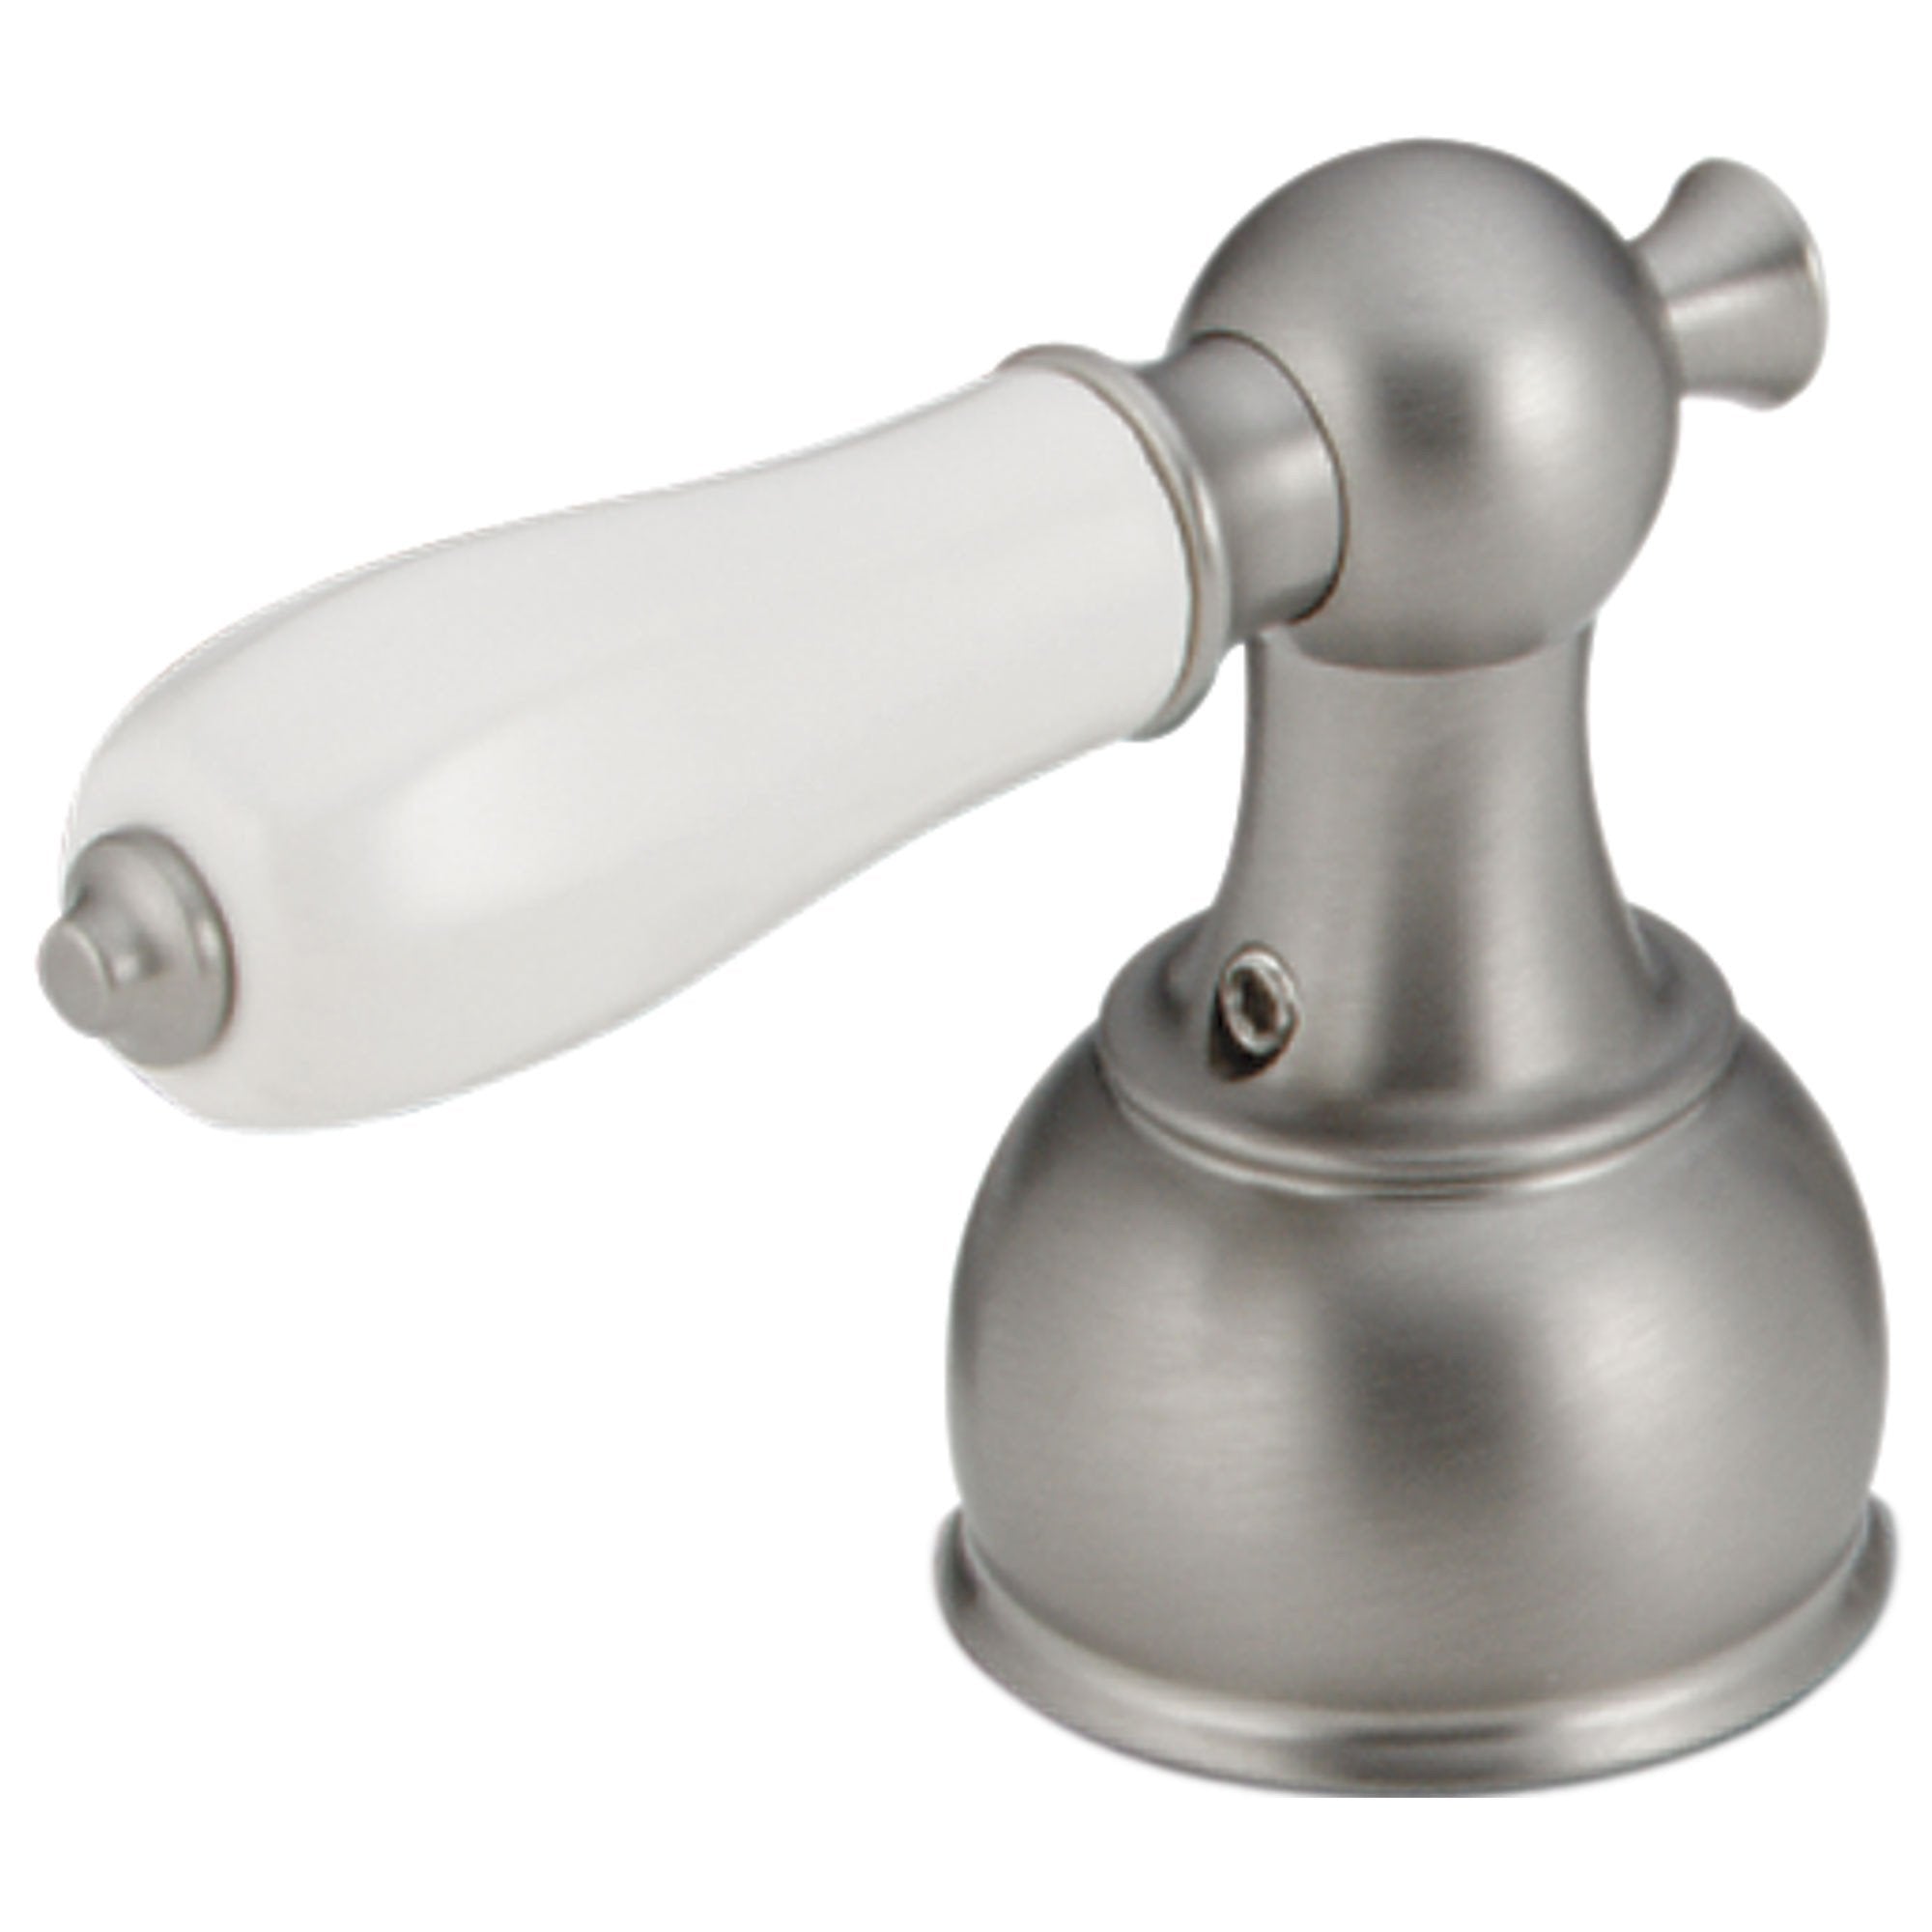 Delta Stainless Steel Finish Lavatory Porcelain Lever Handles with White Accents - Quantity 2 Included DH212SS